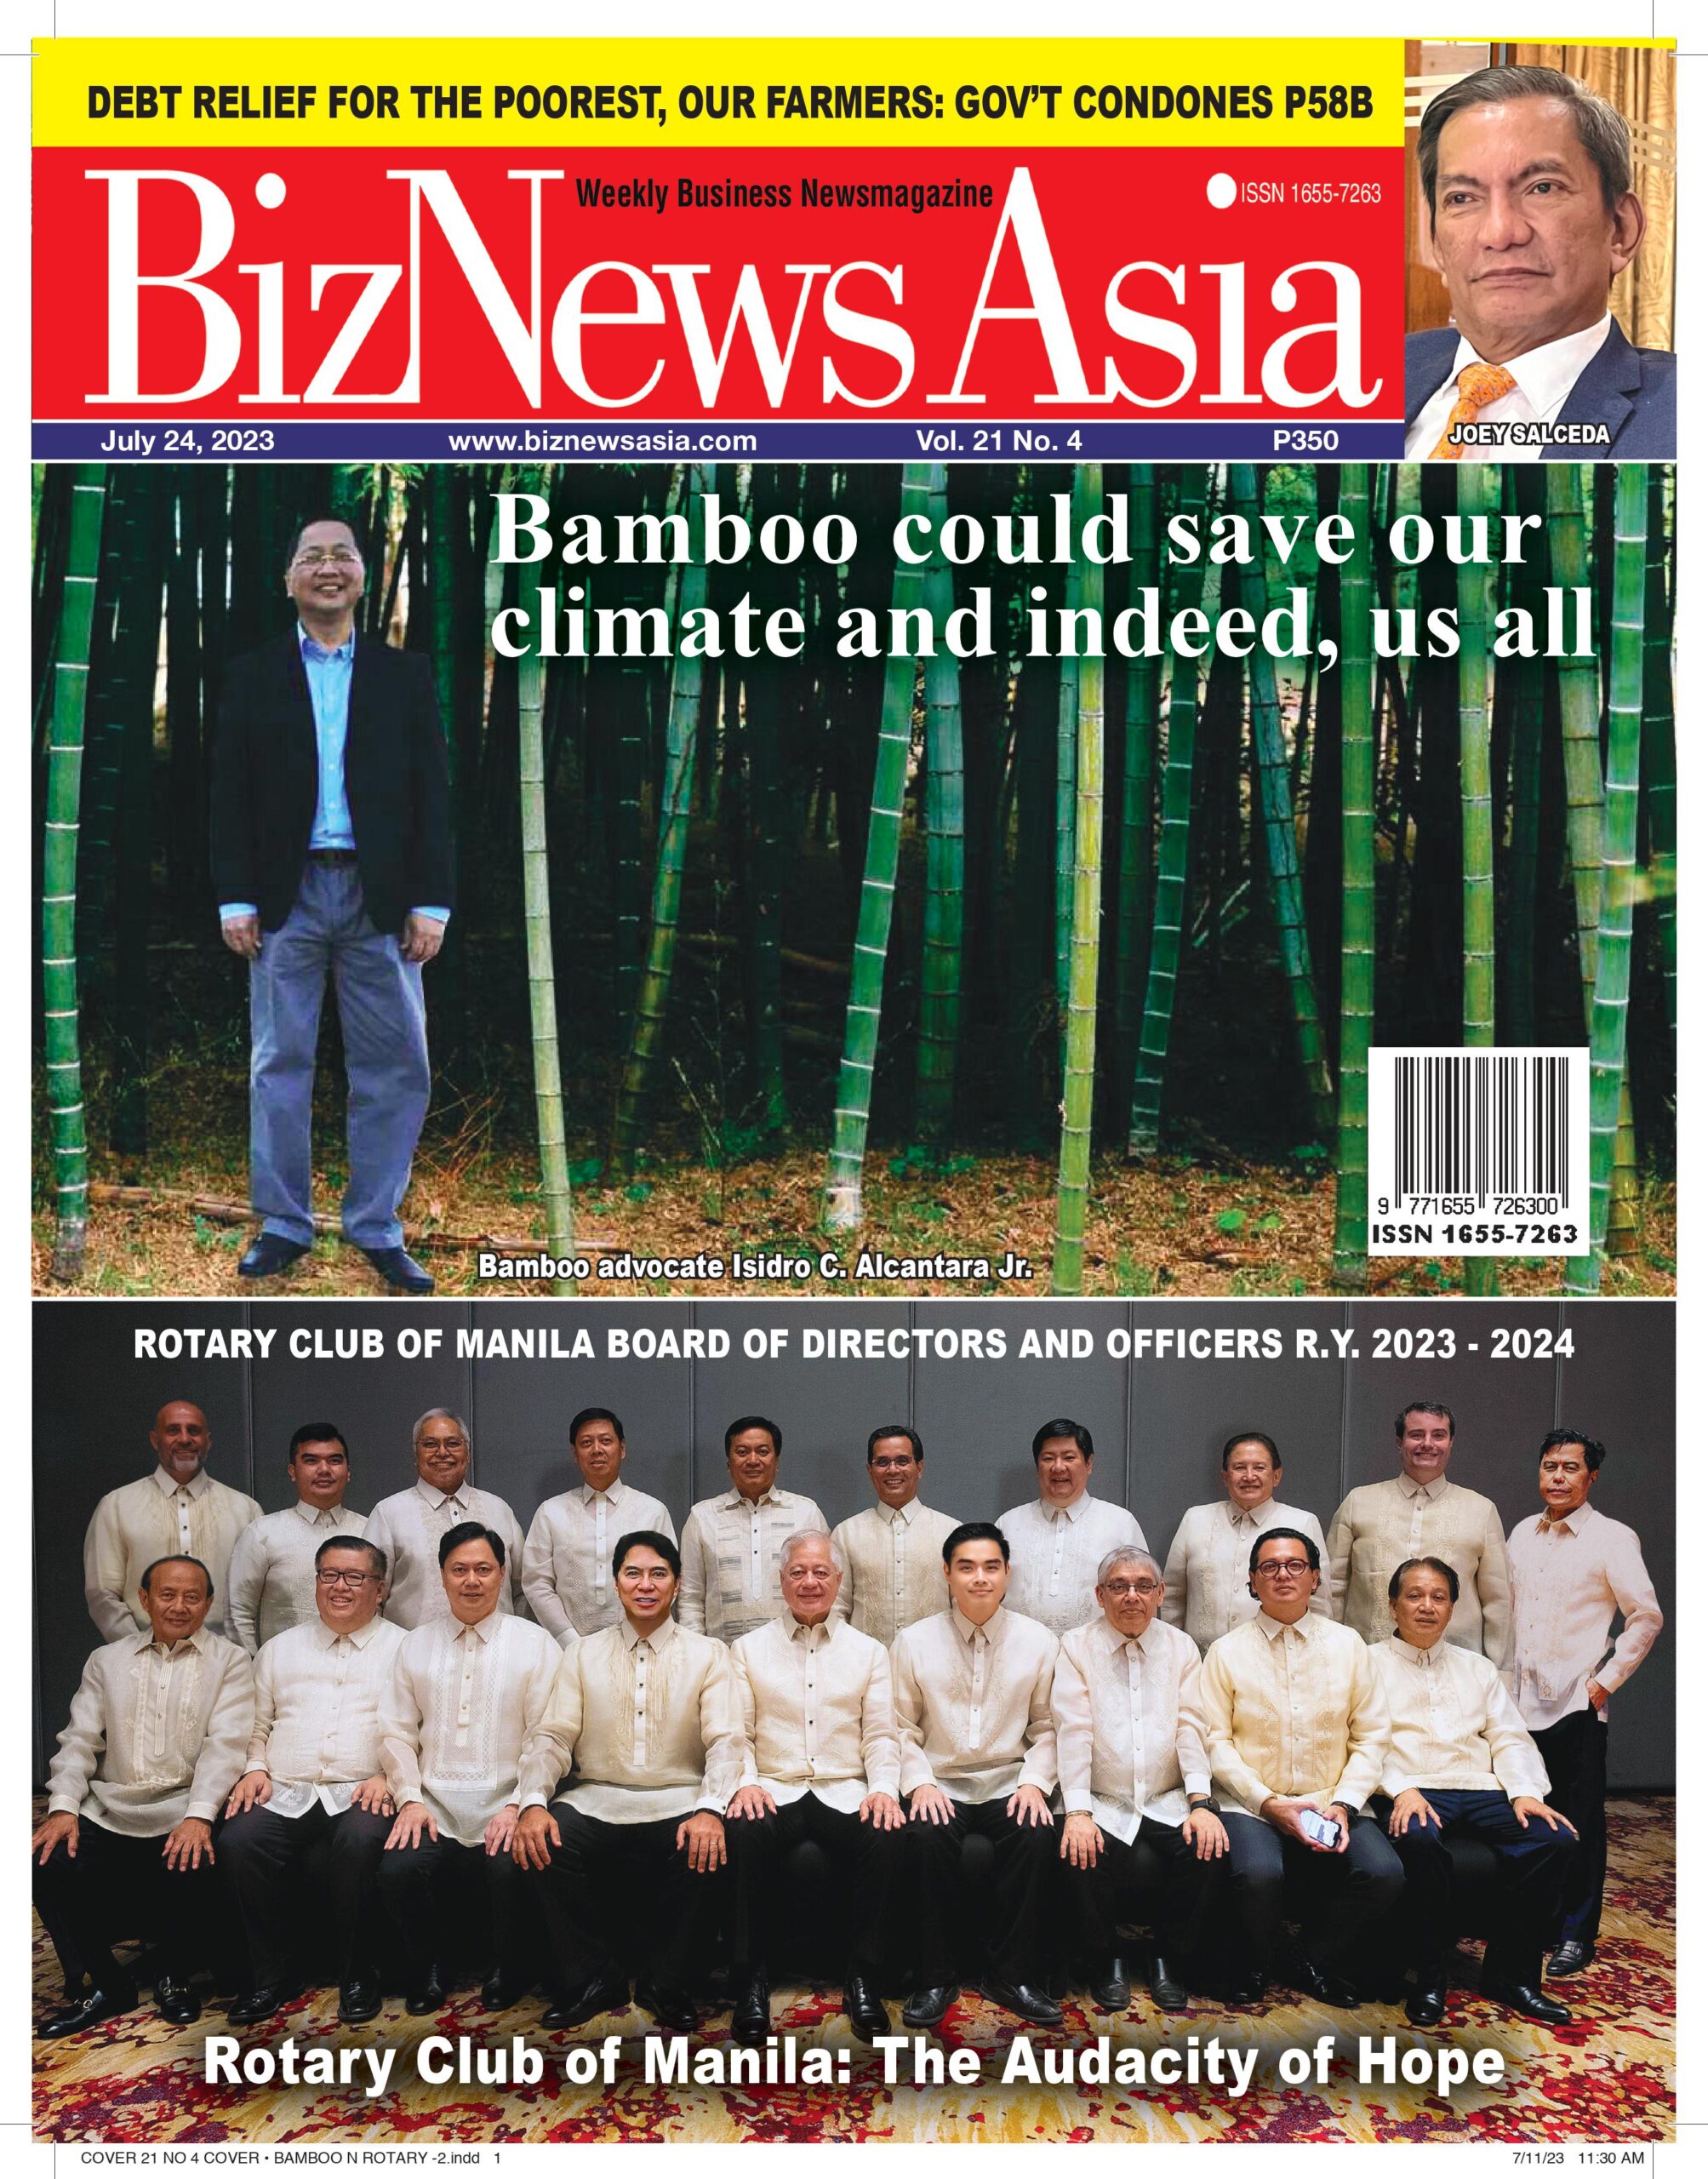 Bamboo could save